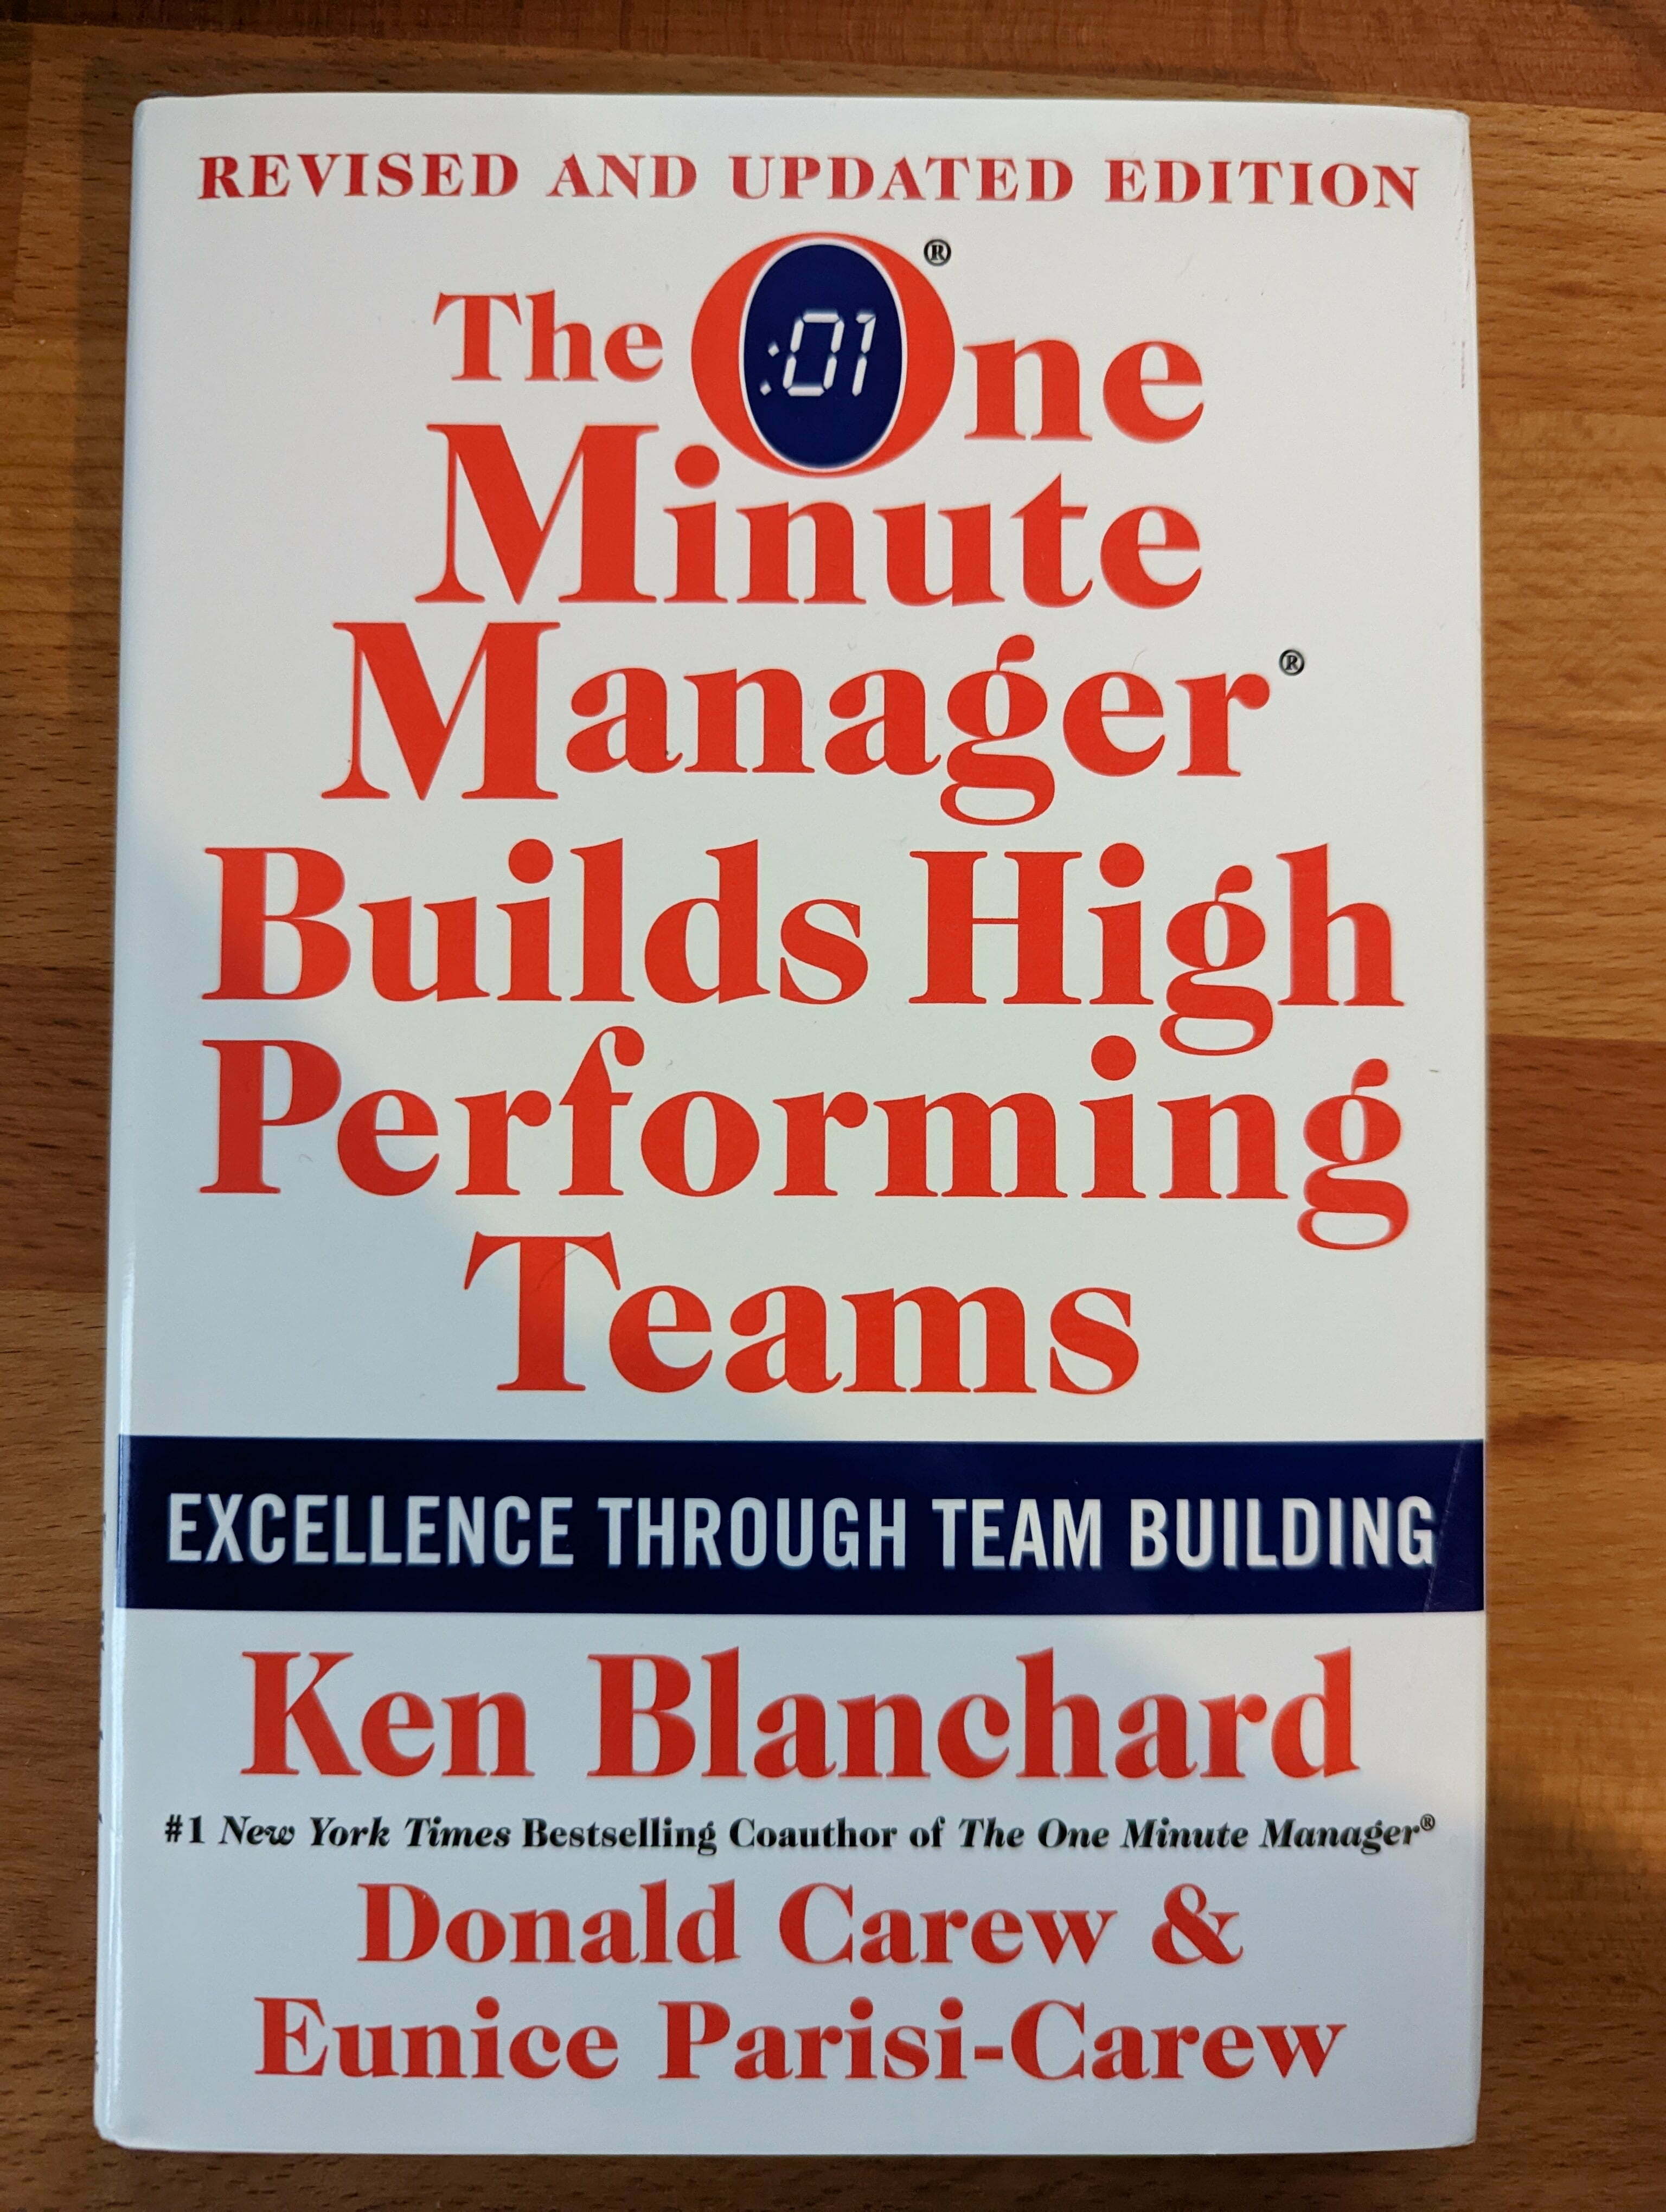 Book Notes – The one minute manager builds high performing teams – Blanchard